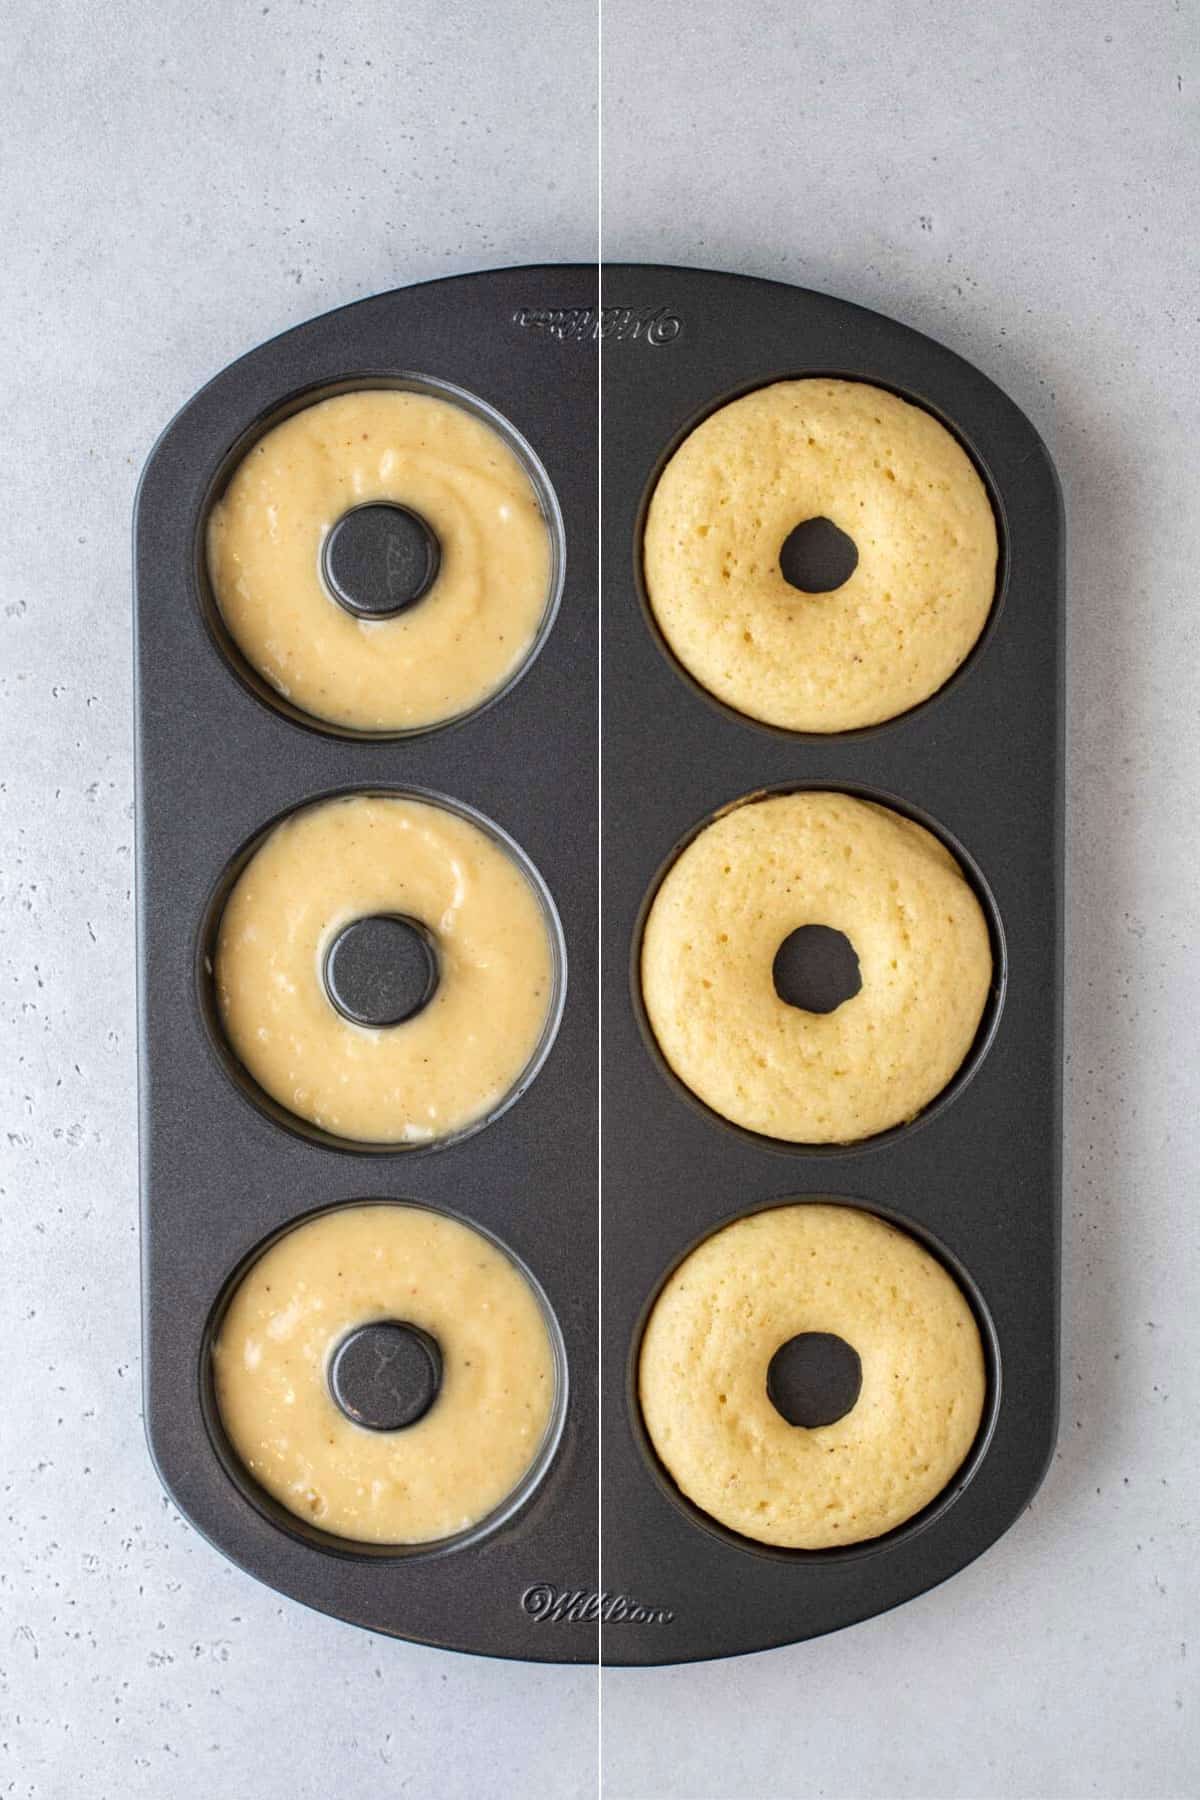 unbaked donuts and baked donuts in donut pan collage